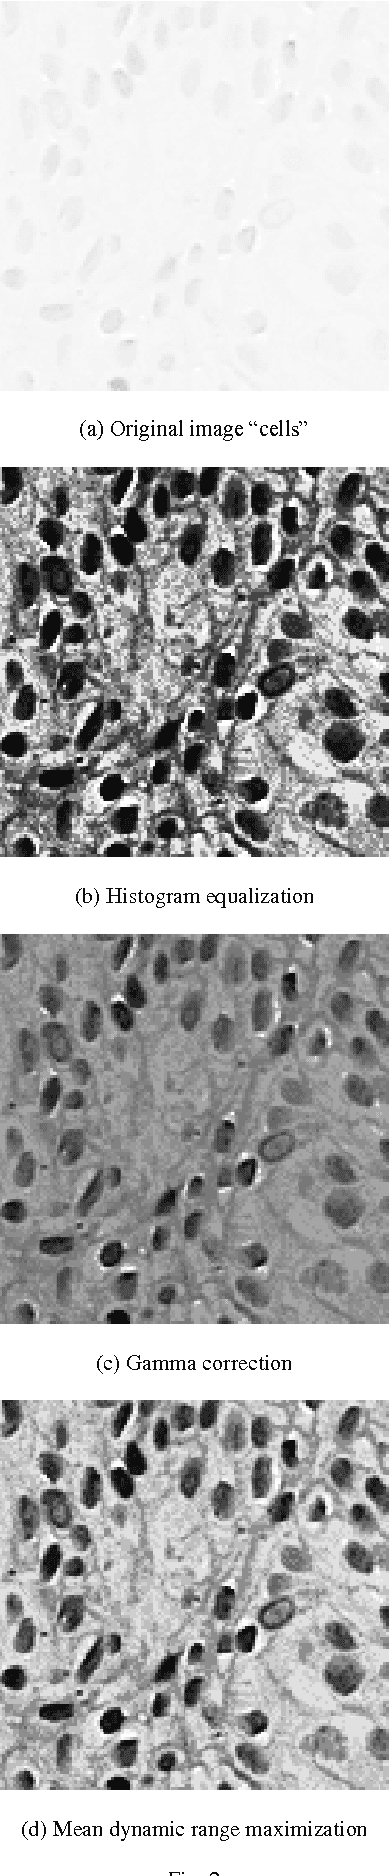 Figure 2 for Image enhancement using the mean dynamic range maximization with logarithmic operations